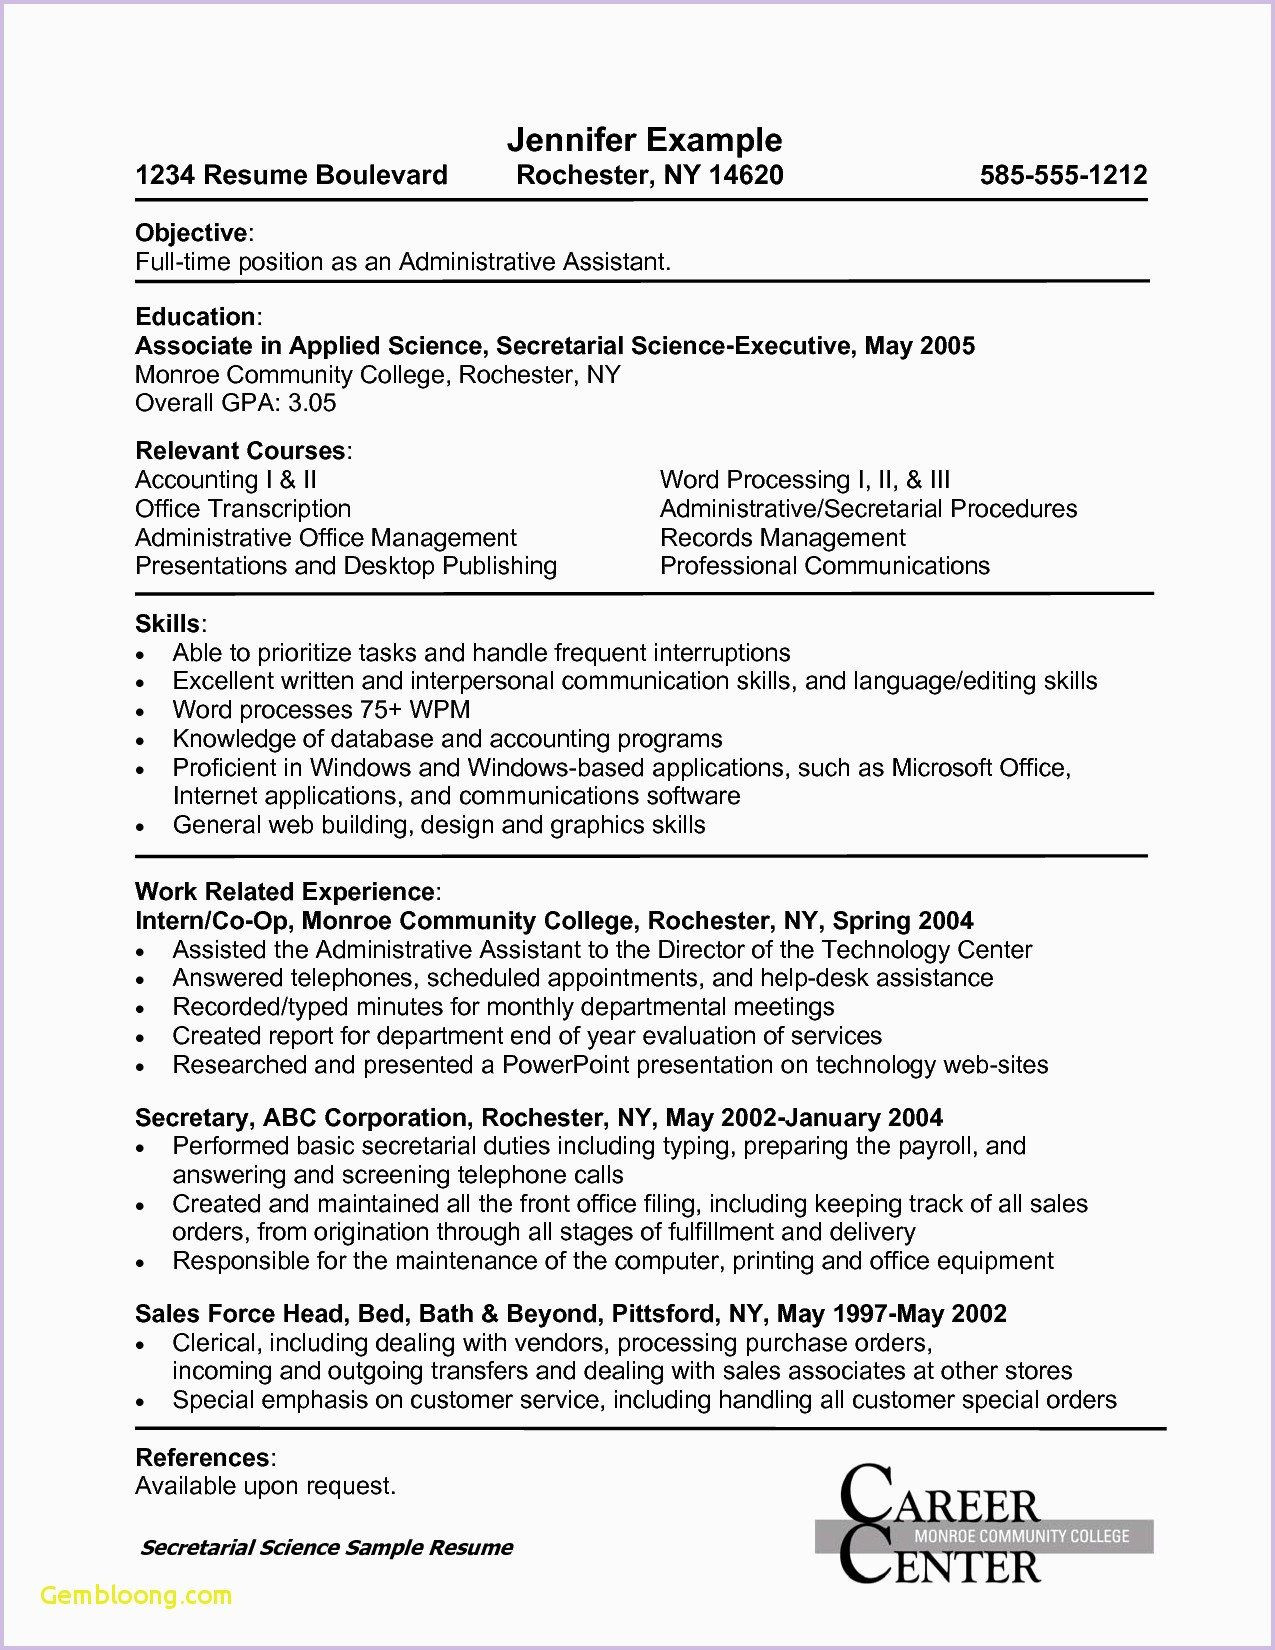 Sample Resume Objective Statements Administrative assistant Office assistant Resume Examples Administrative assistant Resume …